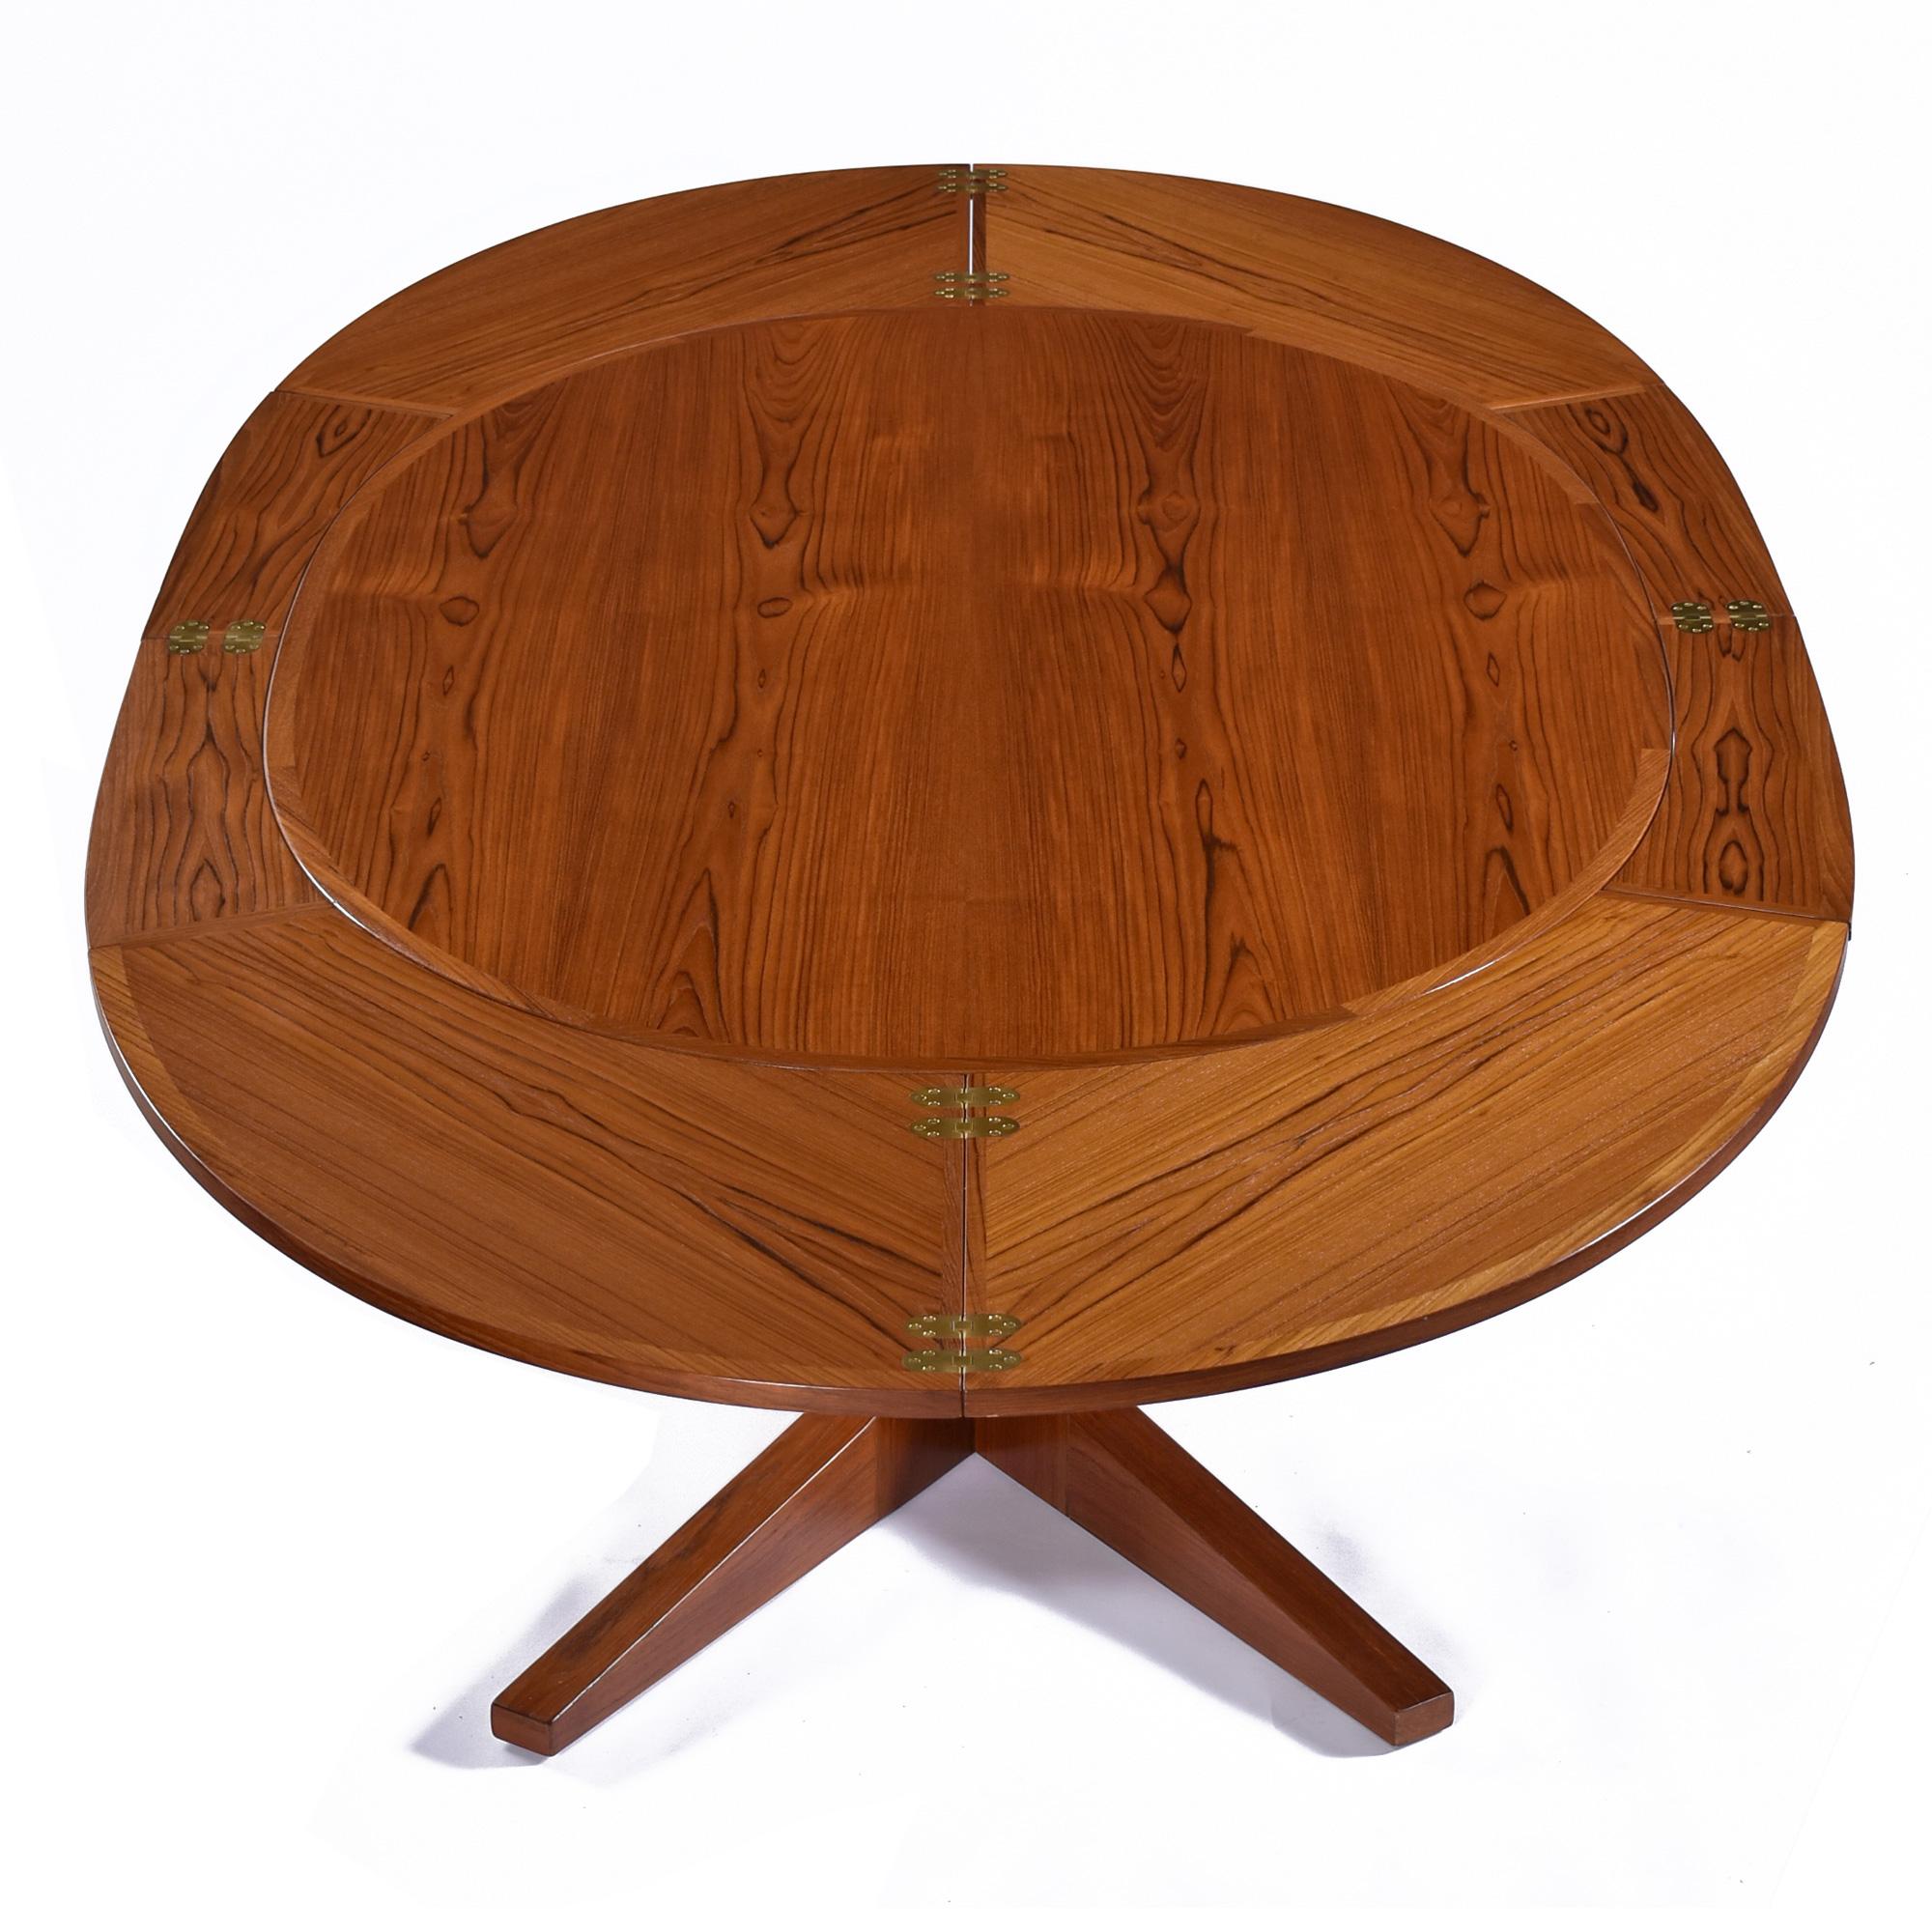 The oval version of the Dylund Flip-Flap Table is a legend.  Calling something in this industry 